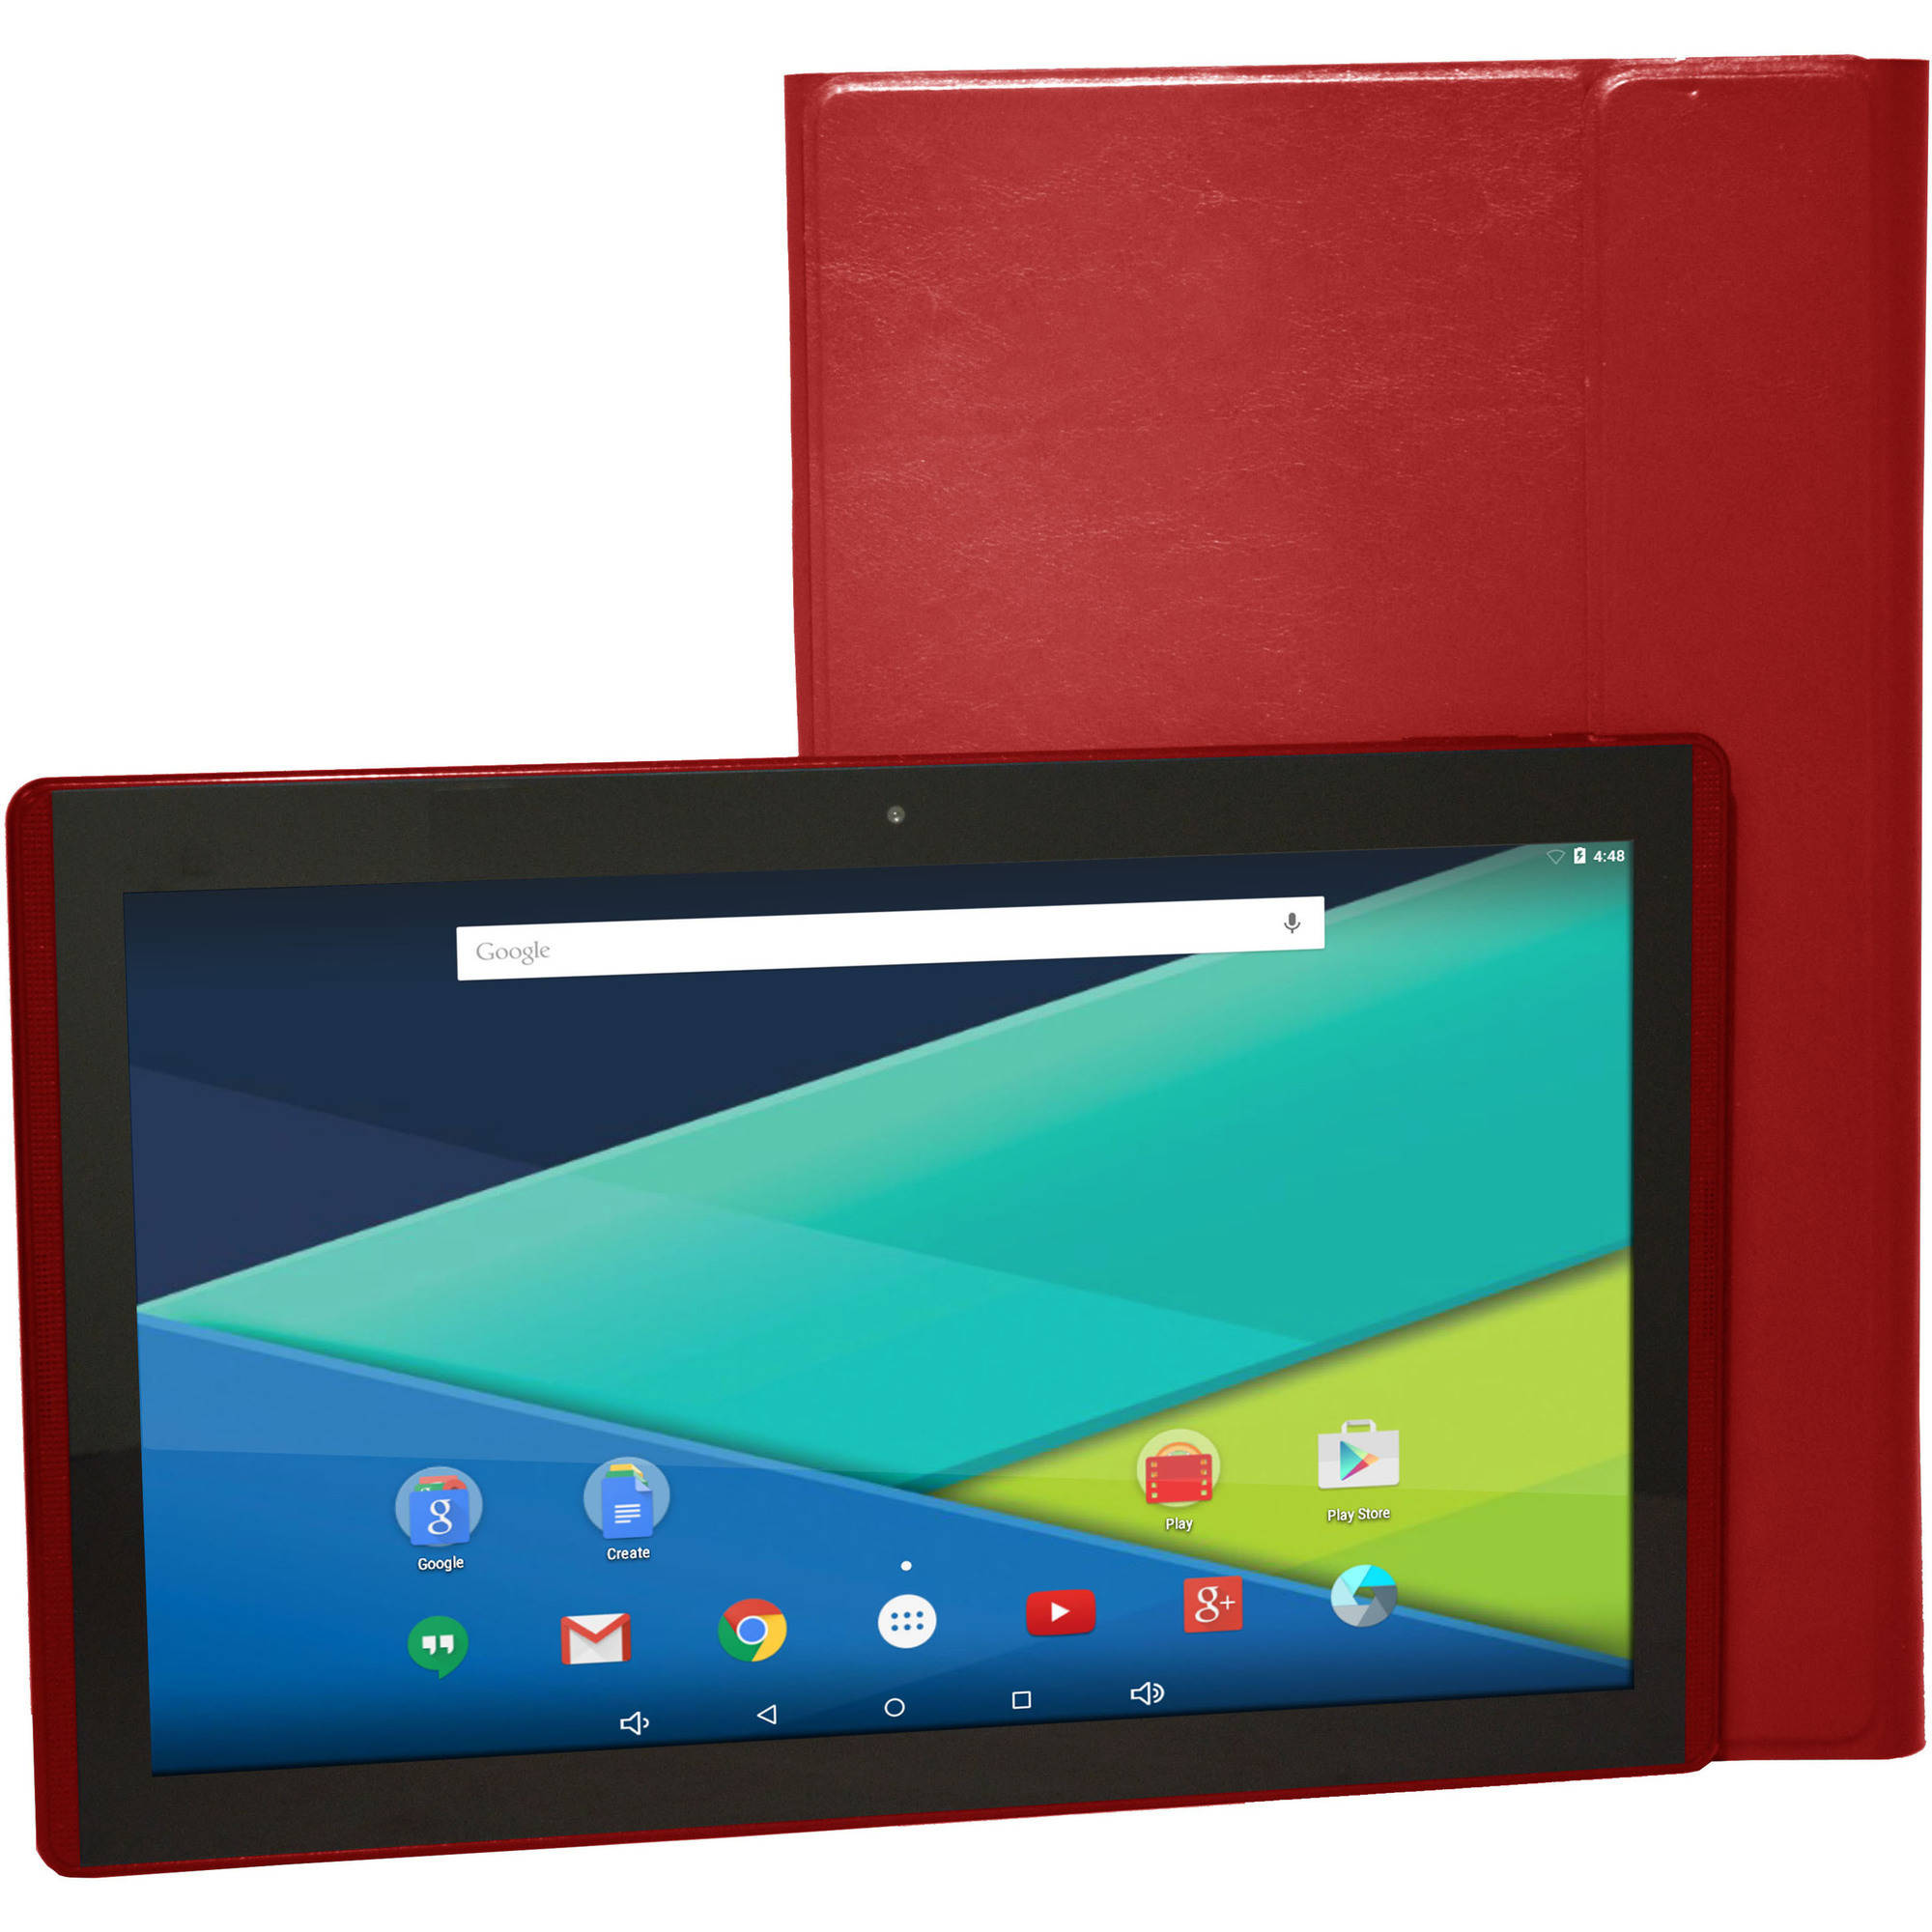 Visual Land 13.3" IPS QuadCore [2-In-1] Tablet 64GB includes Docking Keyboard Case, Android 5.1 Lollipop - image 2 of 4